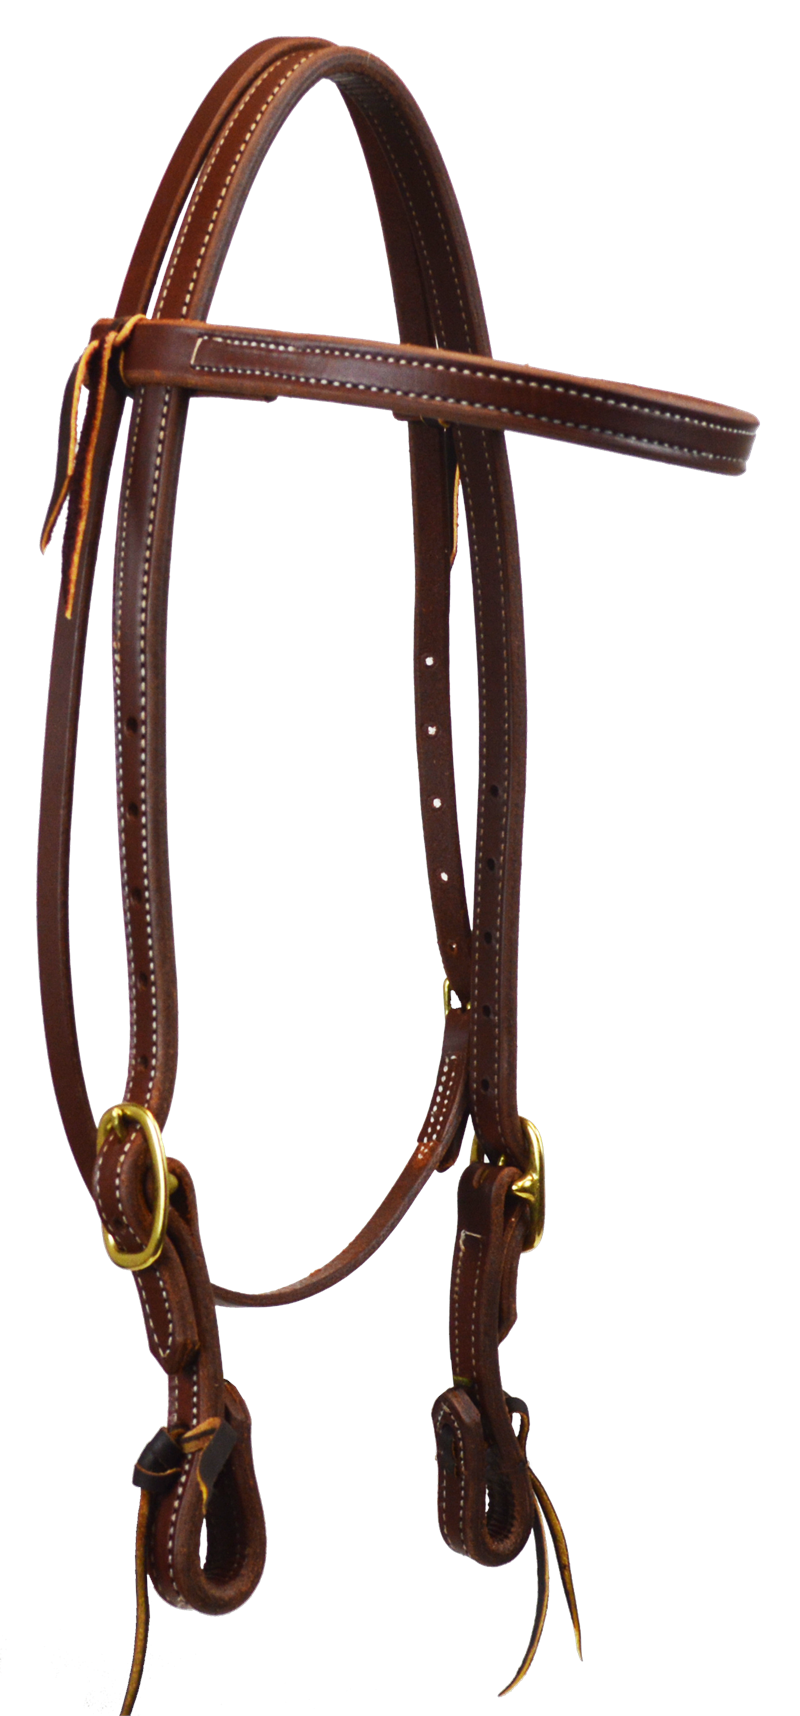 3/4" DOUBLE & STITCHED BROWBAND HEADSTALL (DARK OIL)